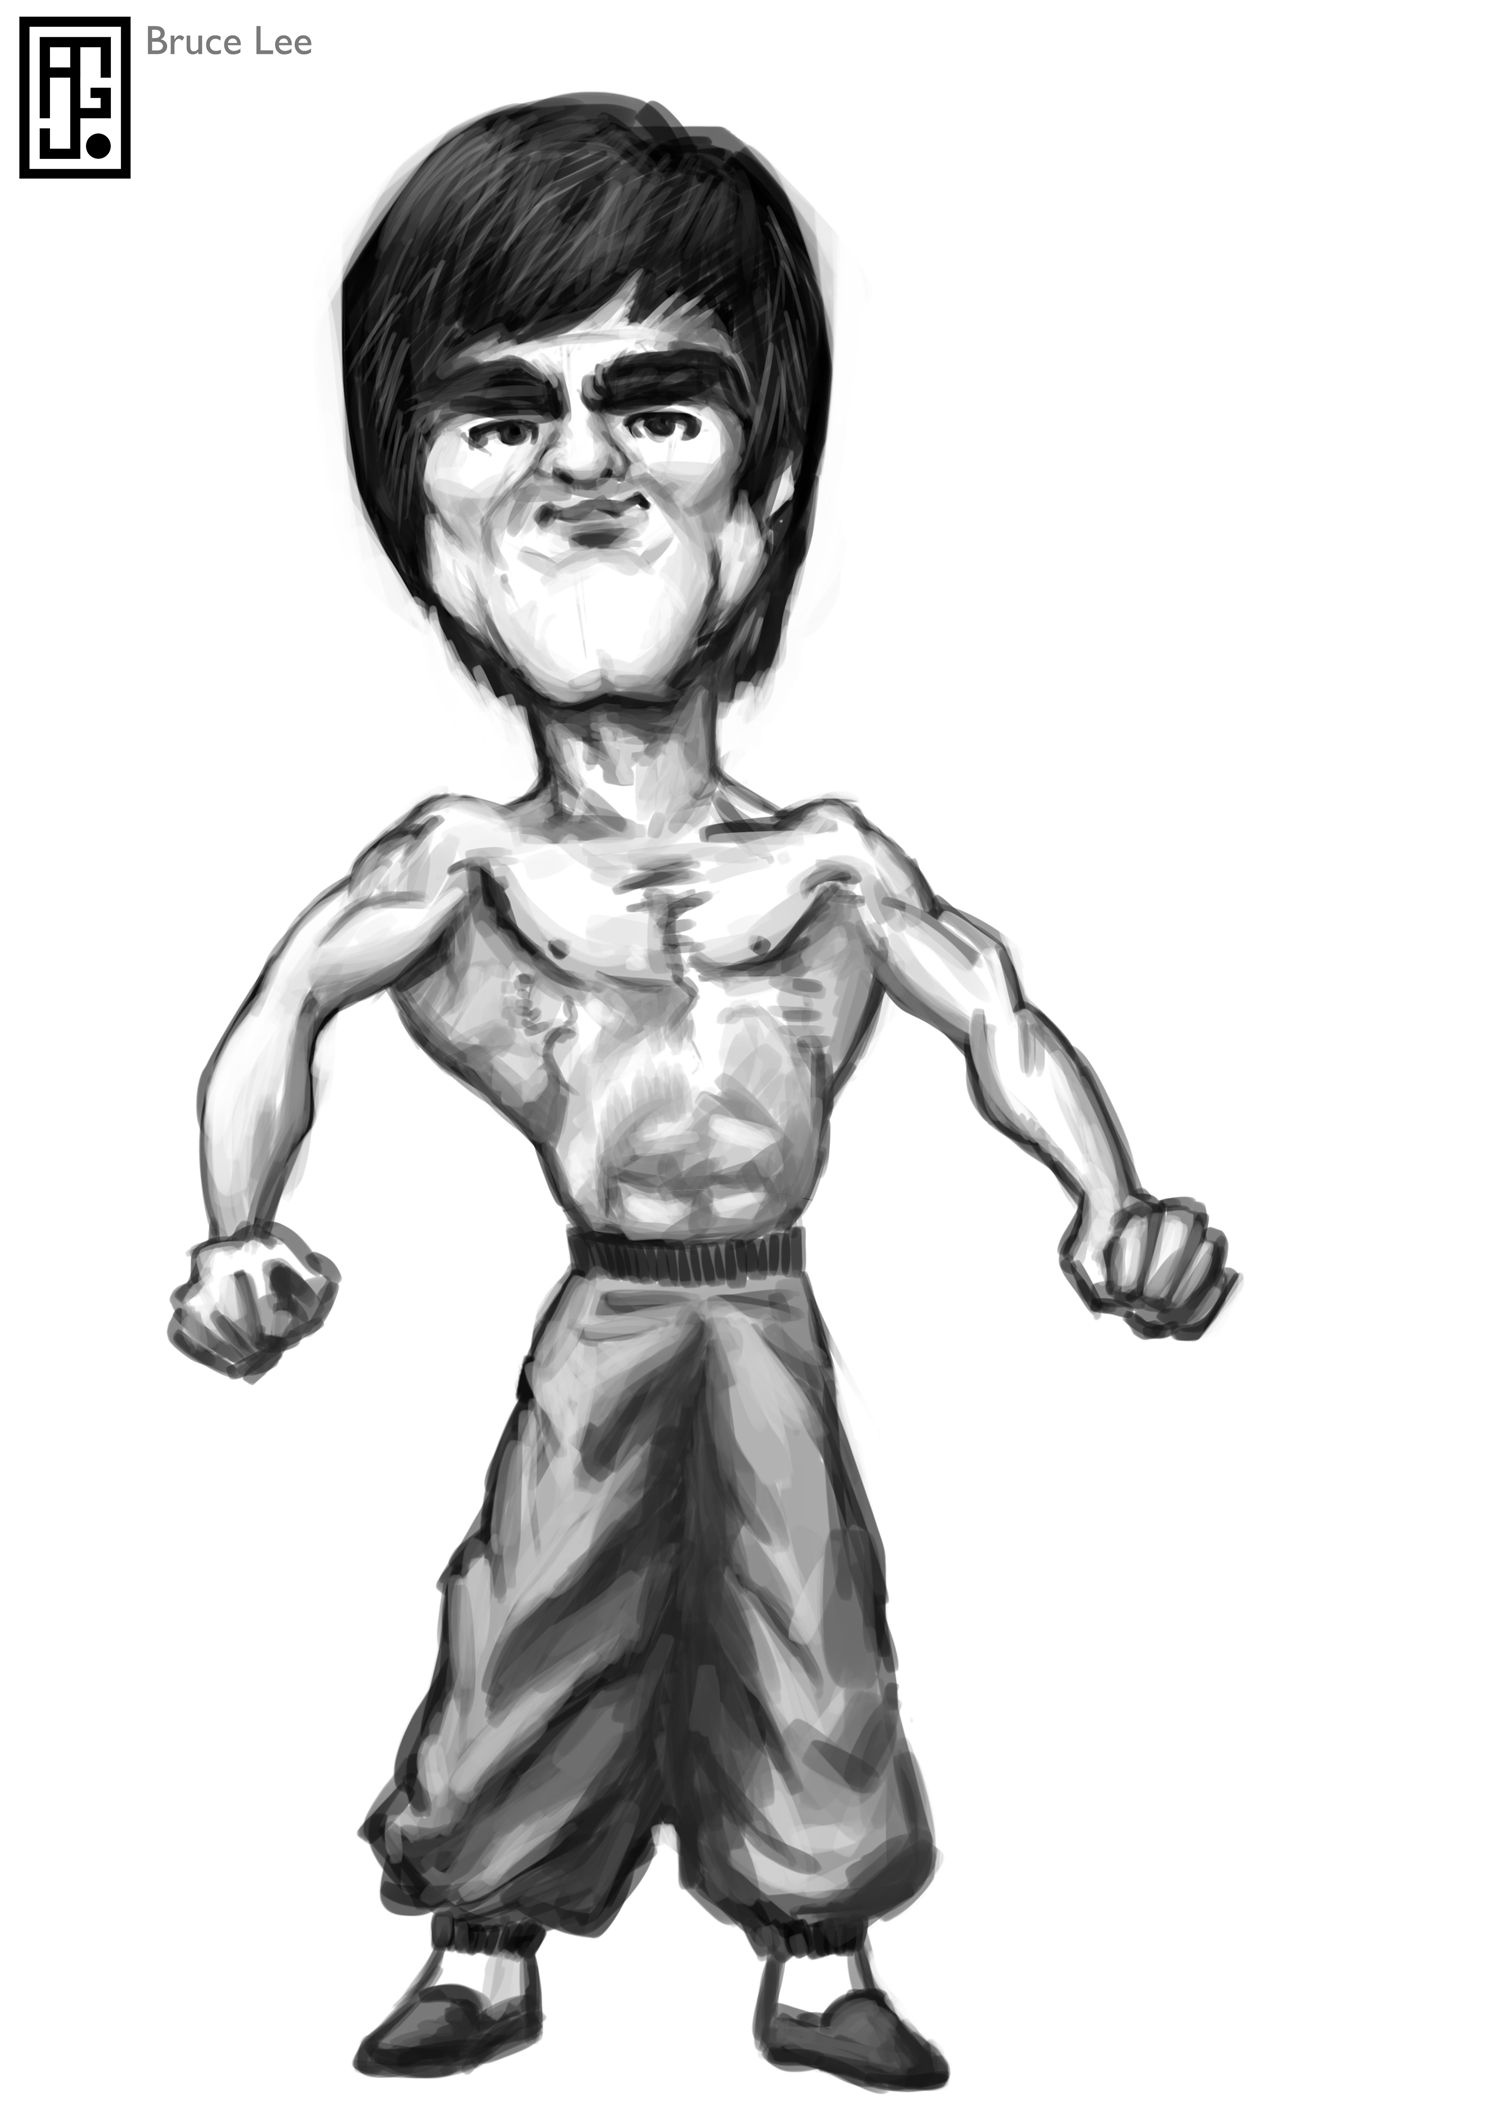 [Image: bruce_lee_caricature_by_andrew_gibbons-dbf78wx.jpg]